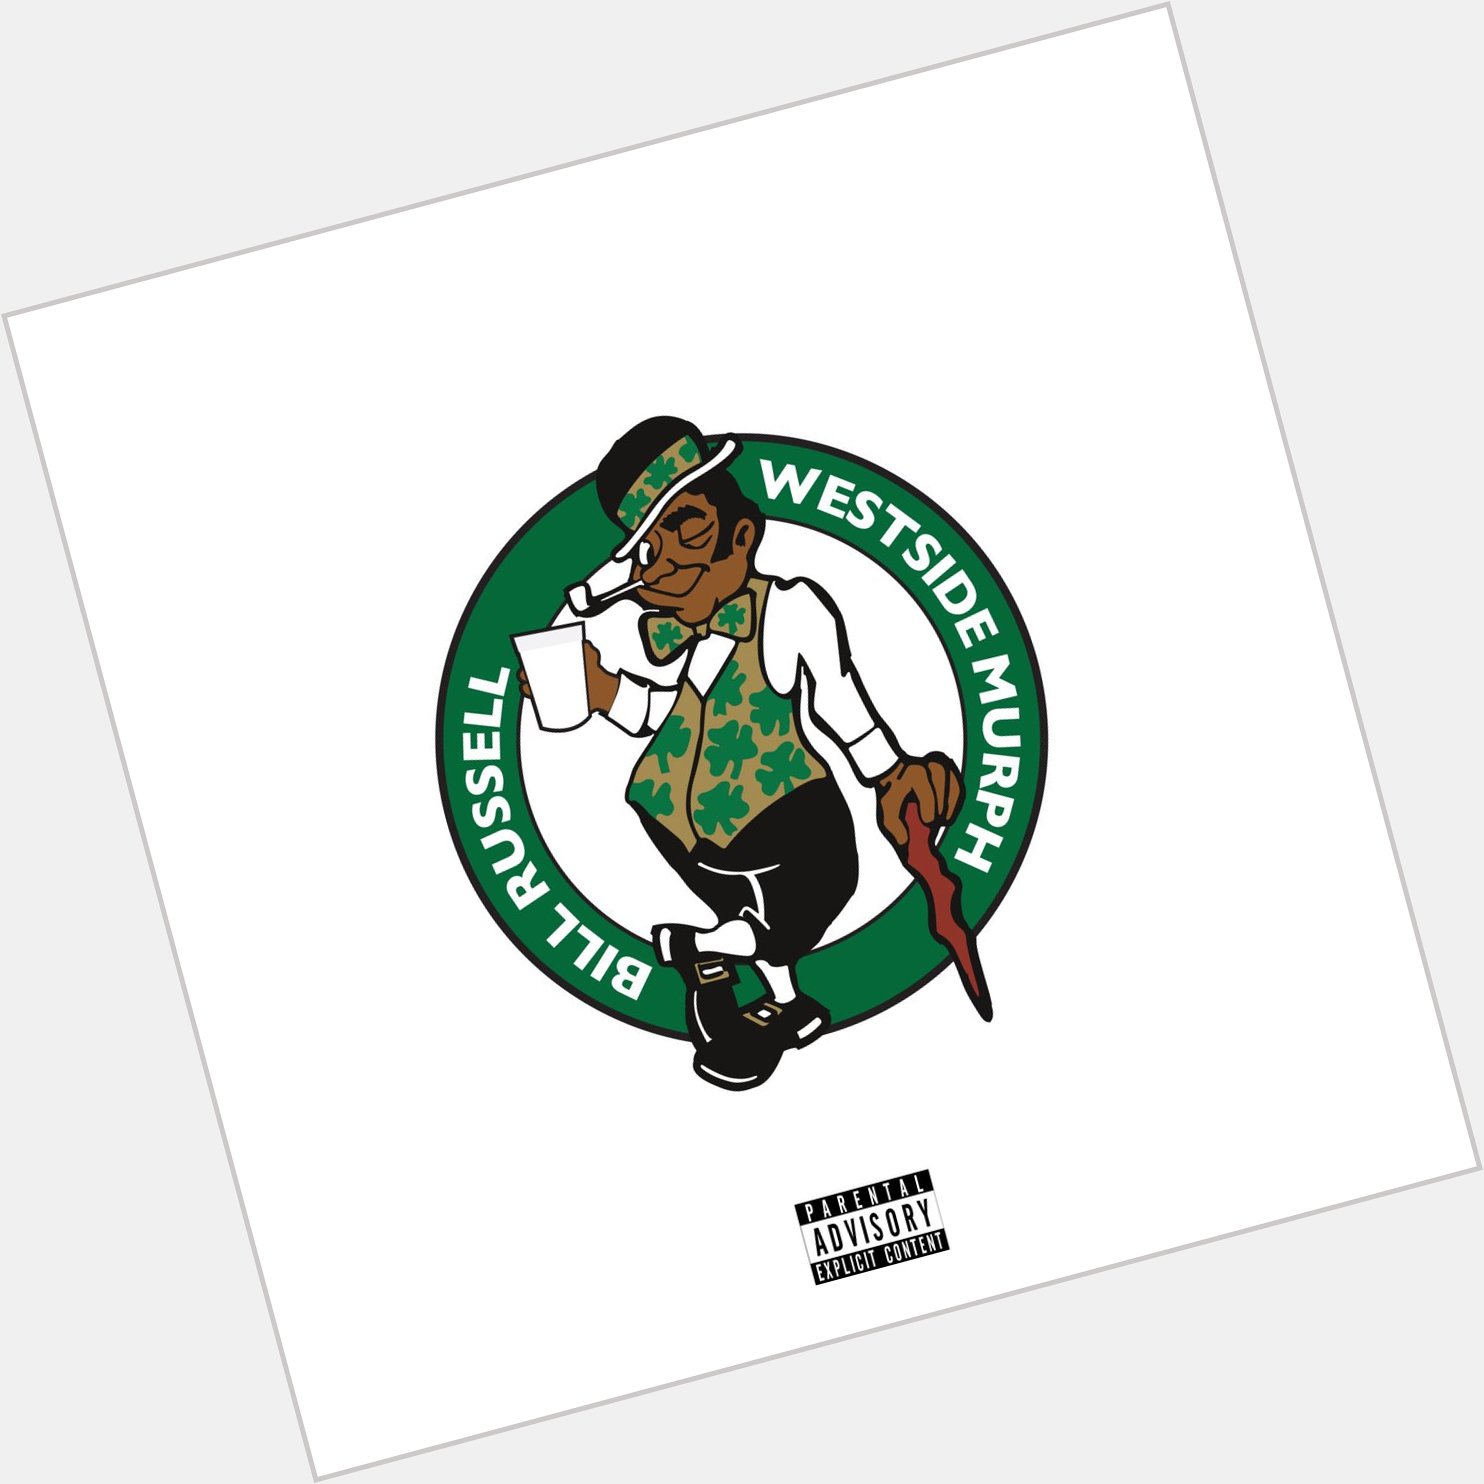 Happy Birthday to Bill Russell. Jiggy dropping this next week doe. 